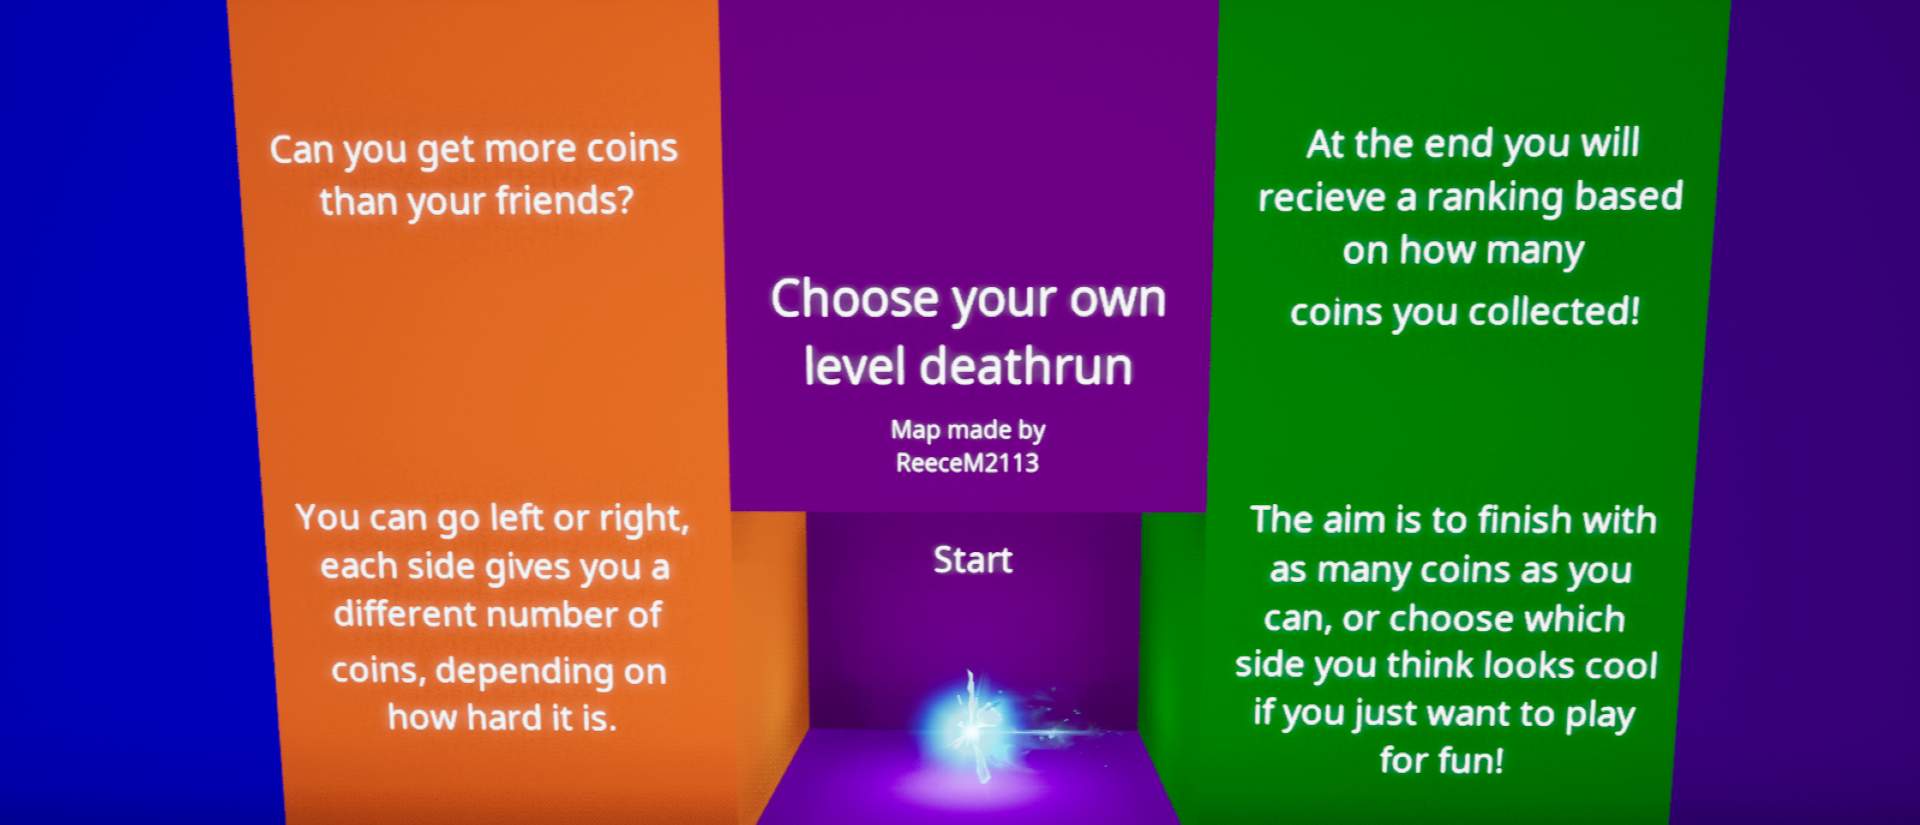 CHOOSE YOUR OWN LEVEL DEATHRUN image 2